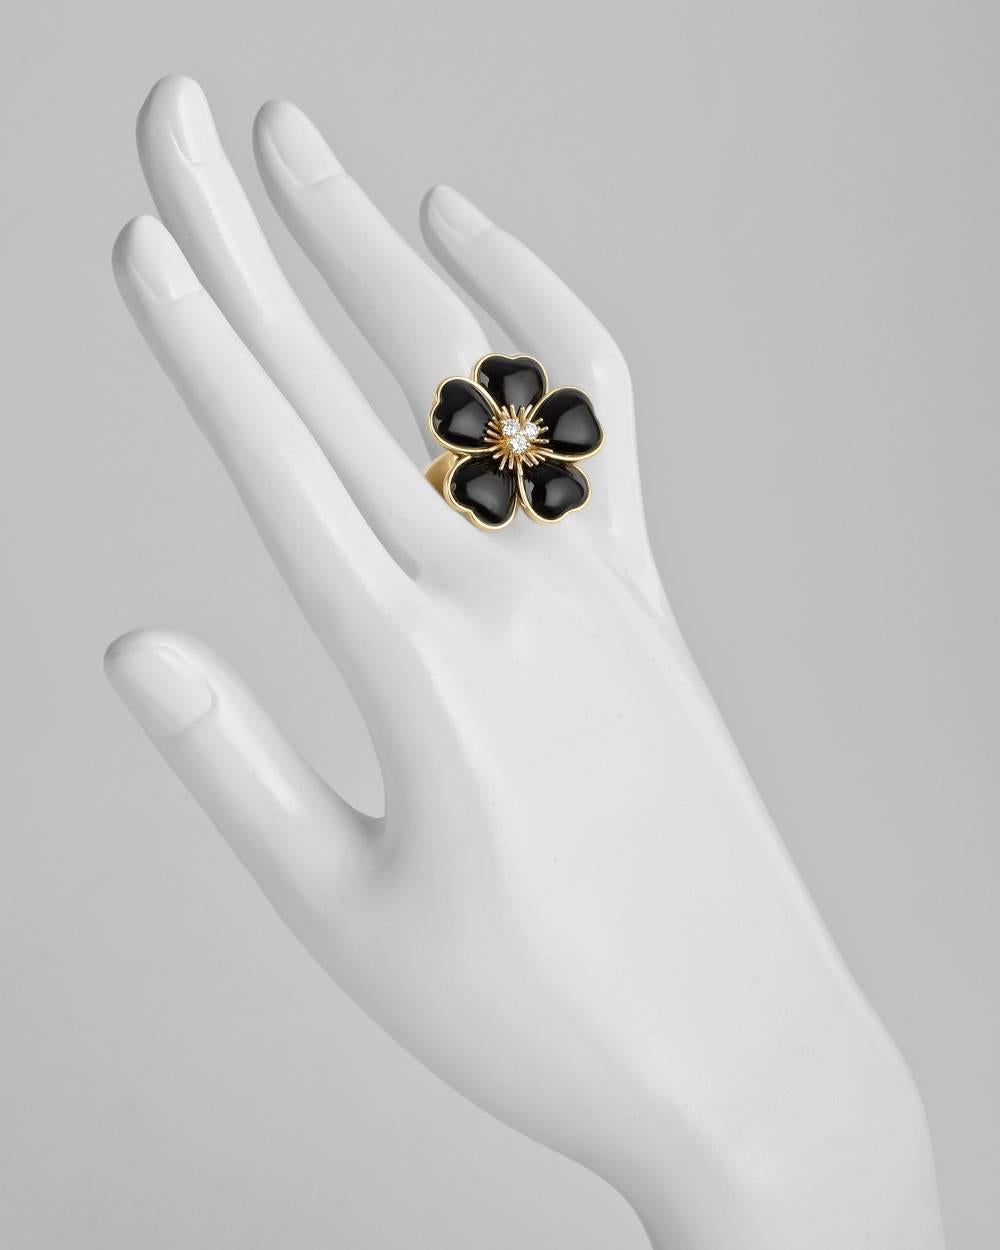 "Rose de Noel" flower cocktail ring, featuring five carved black onyx petals surrounding a cluster of three round brilliant-cut diamonds, in 18k yellow gold, numbered 'B8001 X4' and signed Van Cleef & Arpels. Size 7.
